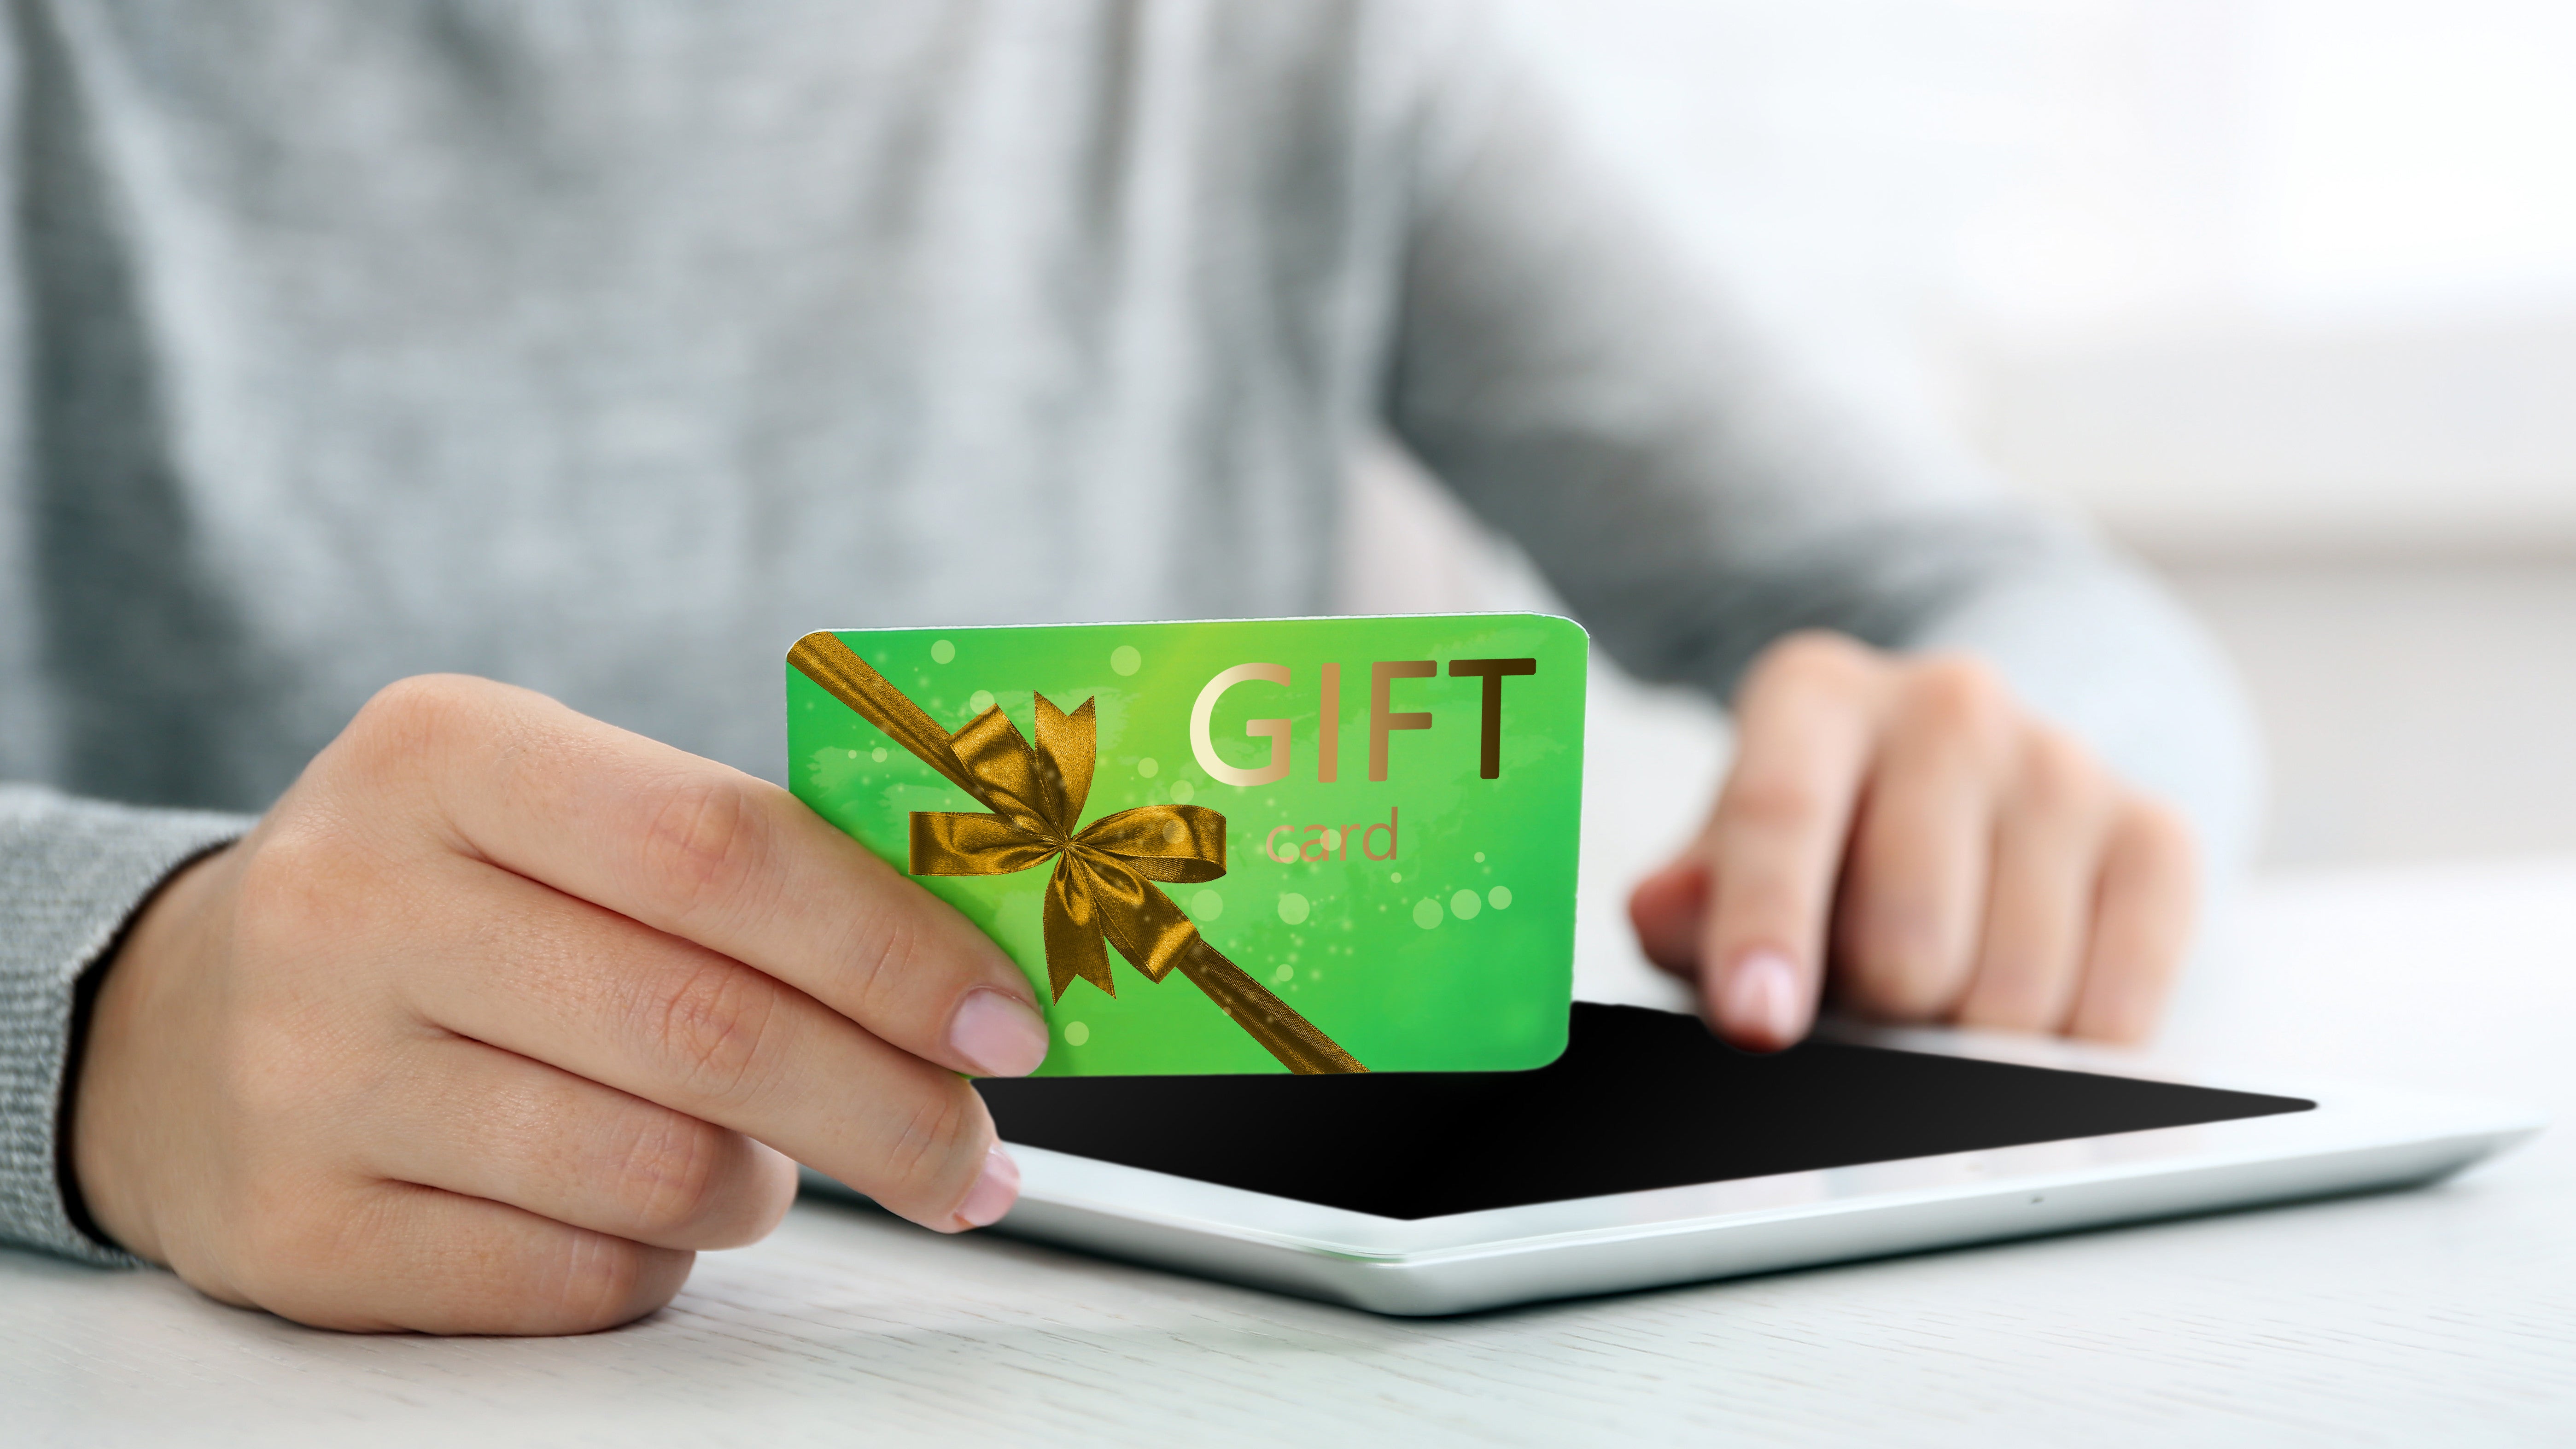 How To Use Up The Last Few Dollars On A Prepaid Gift Card